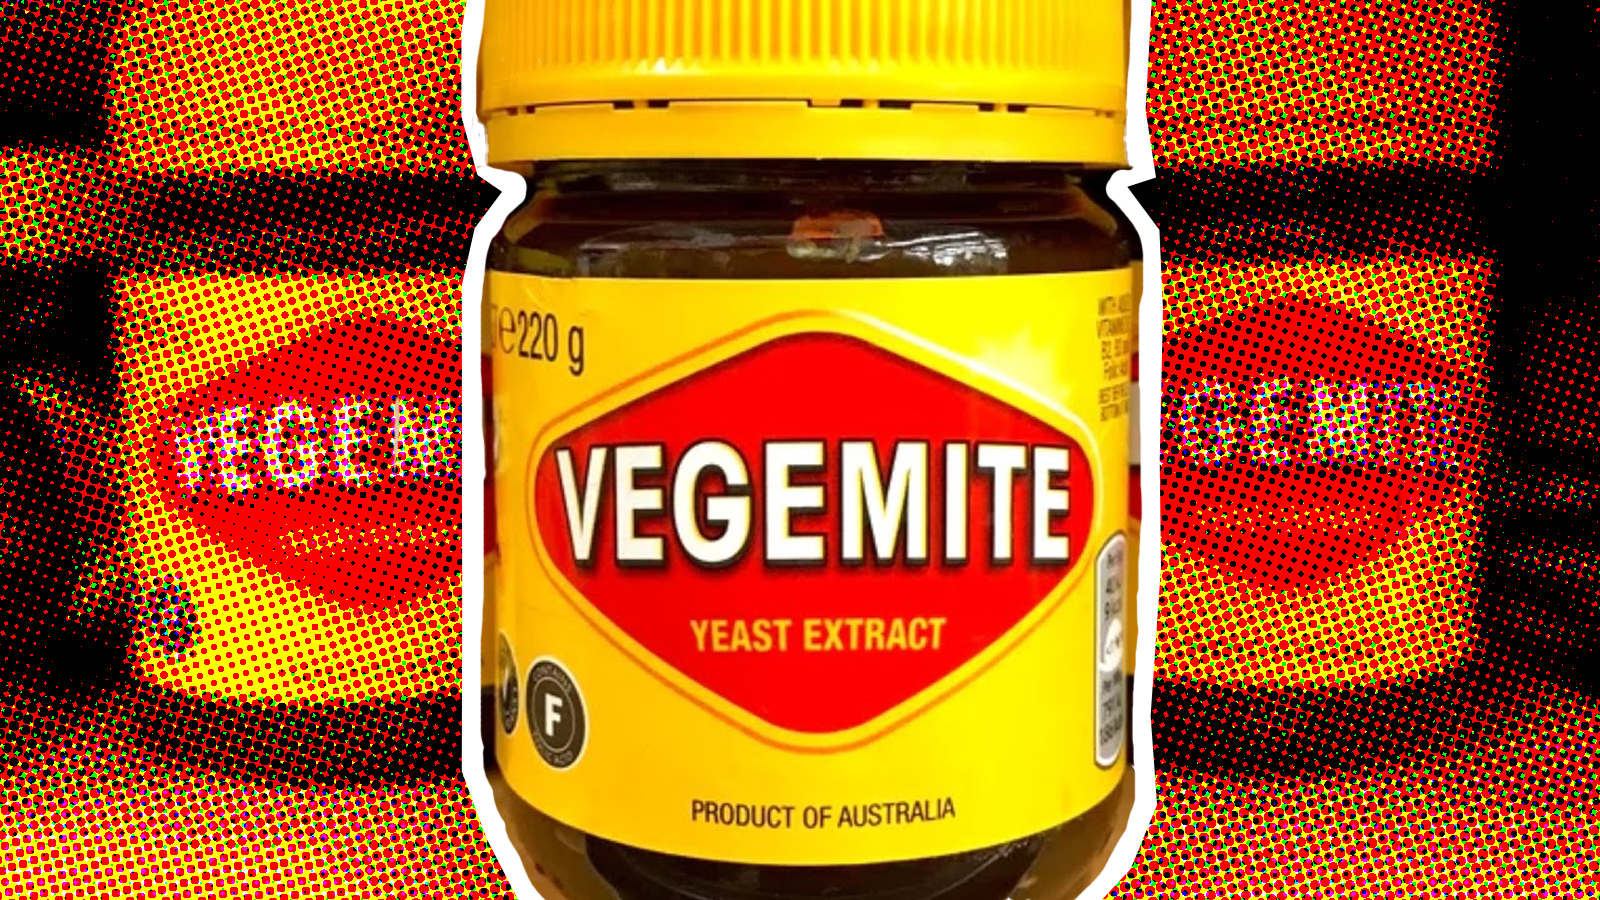 American Asks If Vegemite Goes Off, Australians Have A Field Day